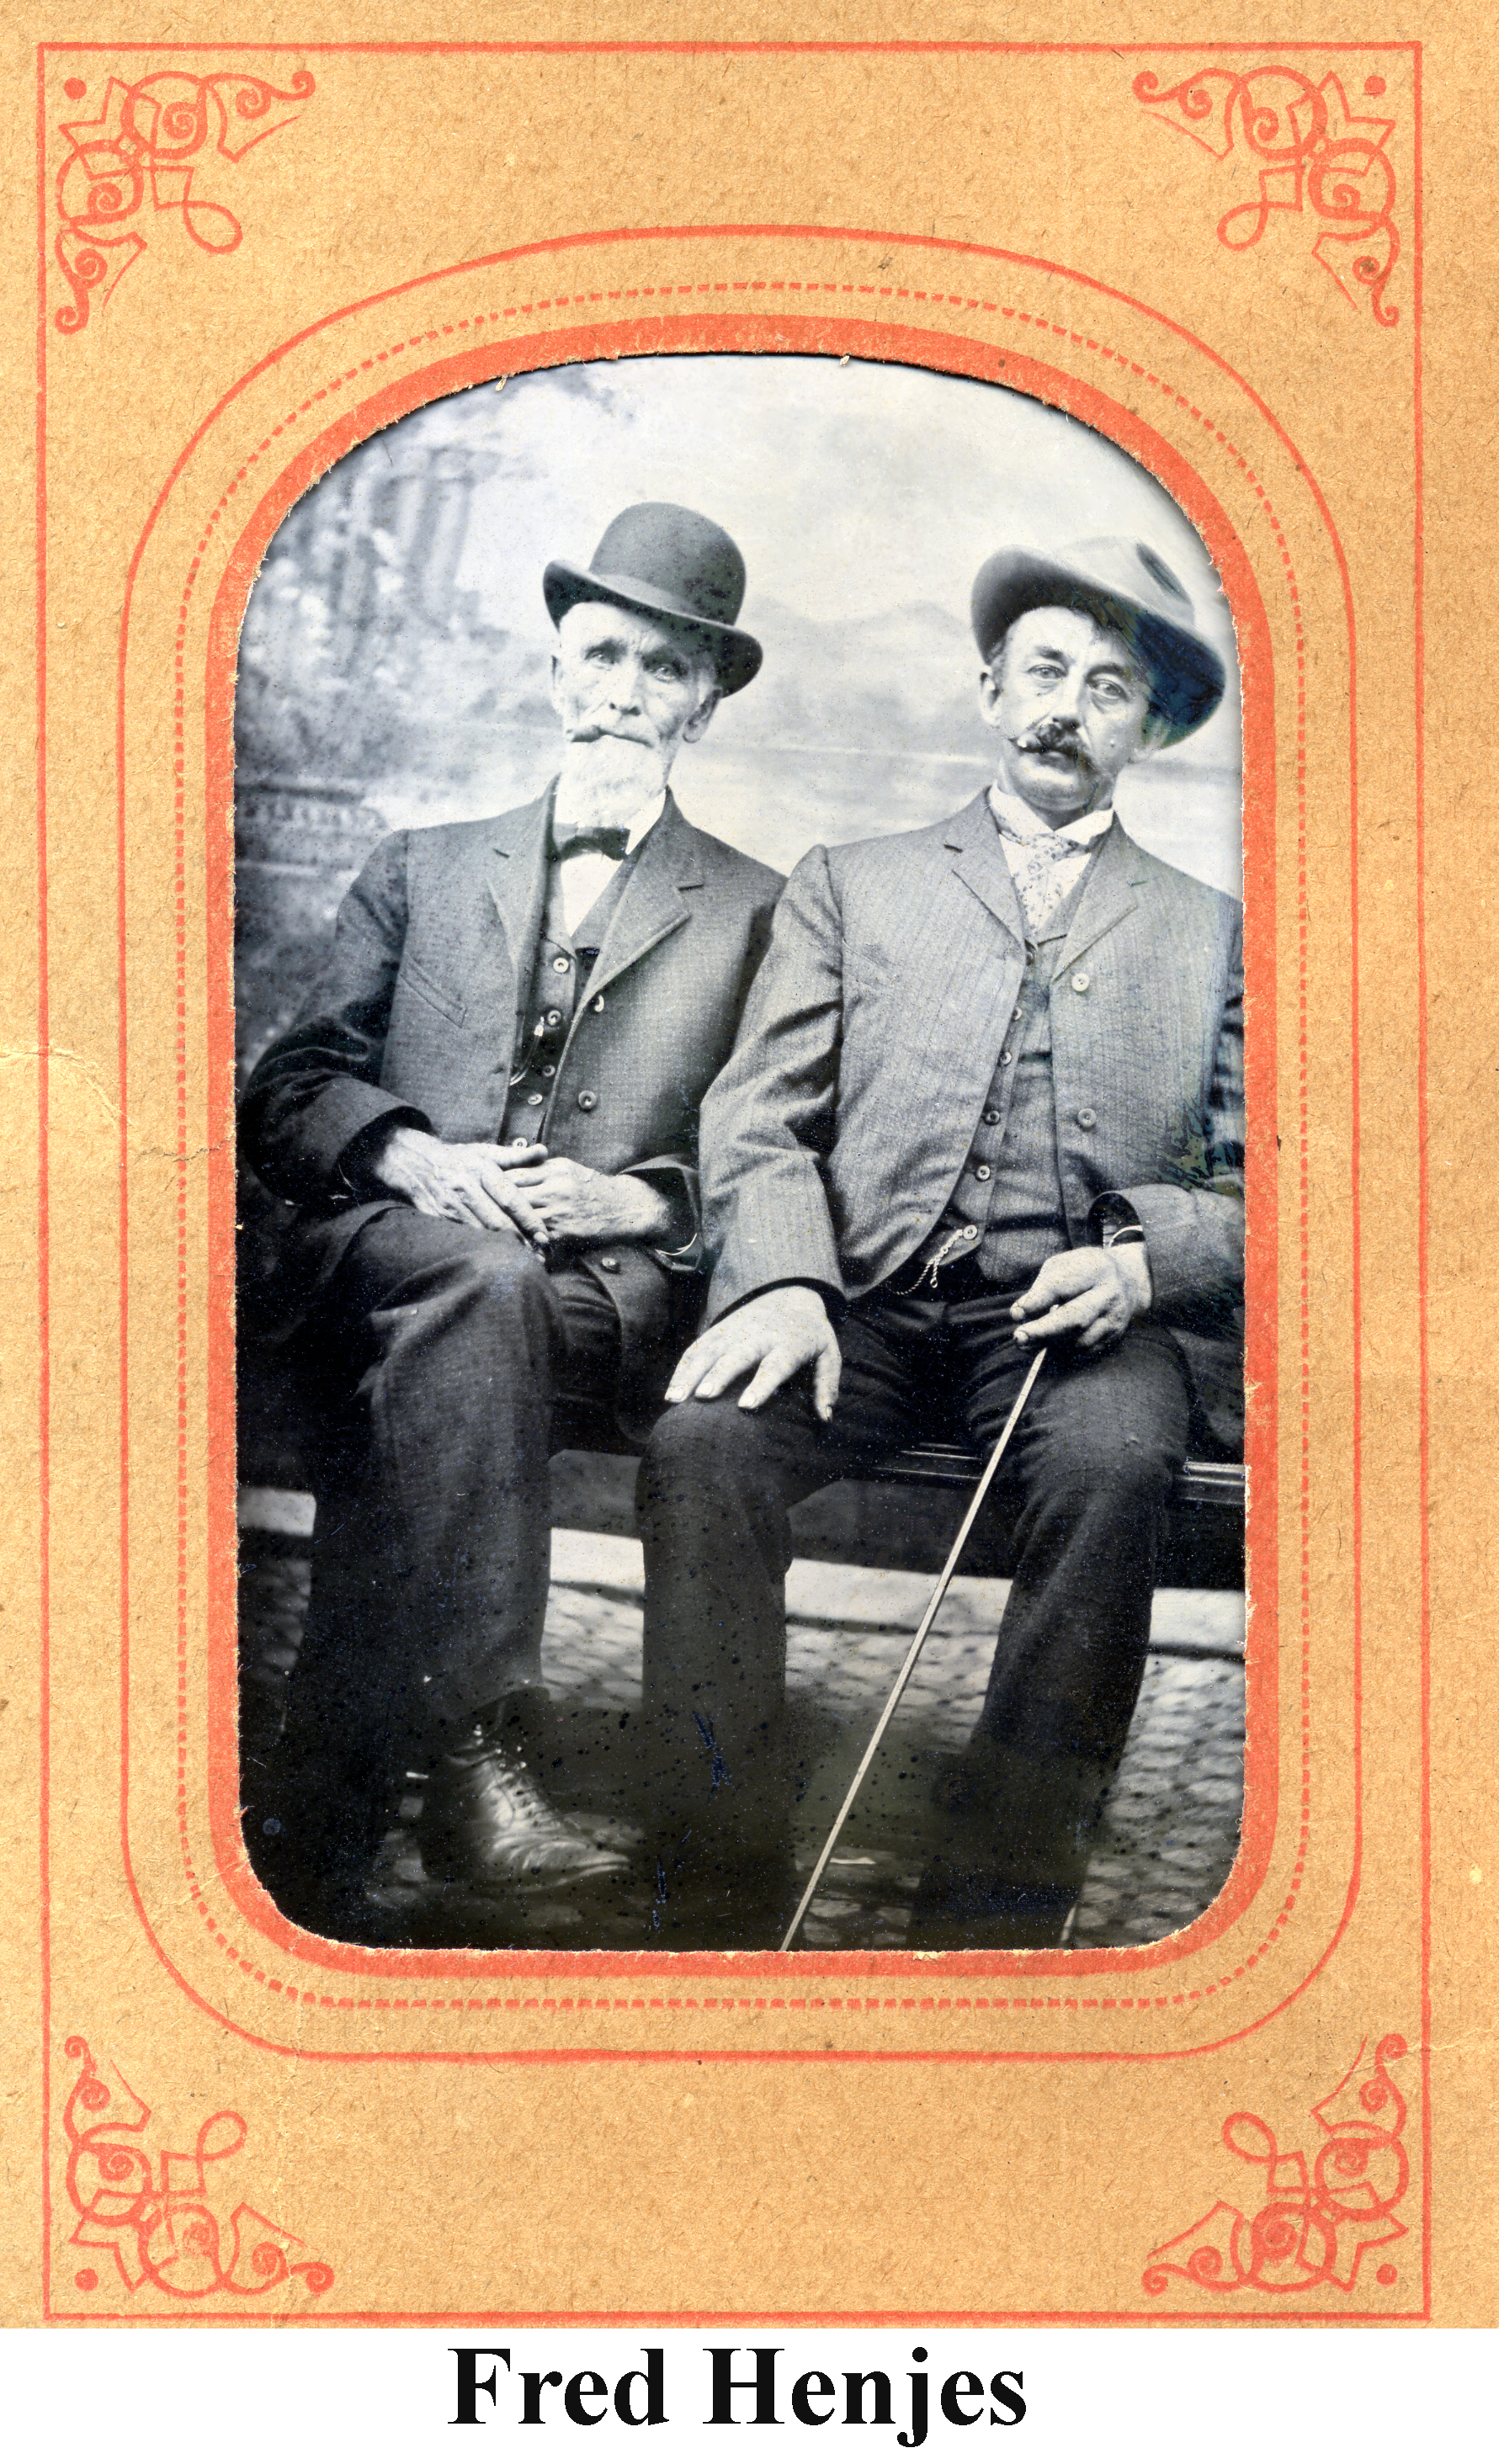 Fred Henjes and an older, white-bearded man in a tintype. The picture hasa nice orange cardboard frame.